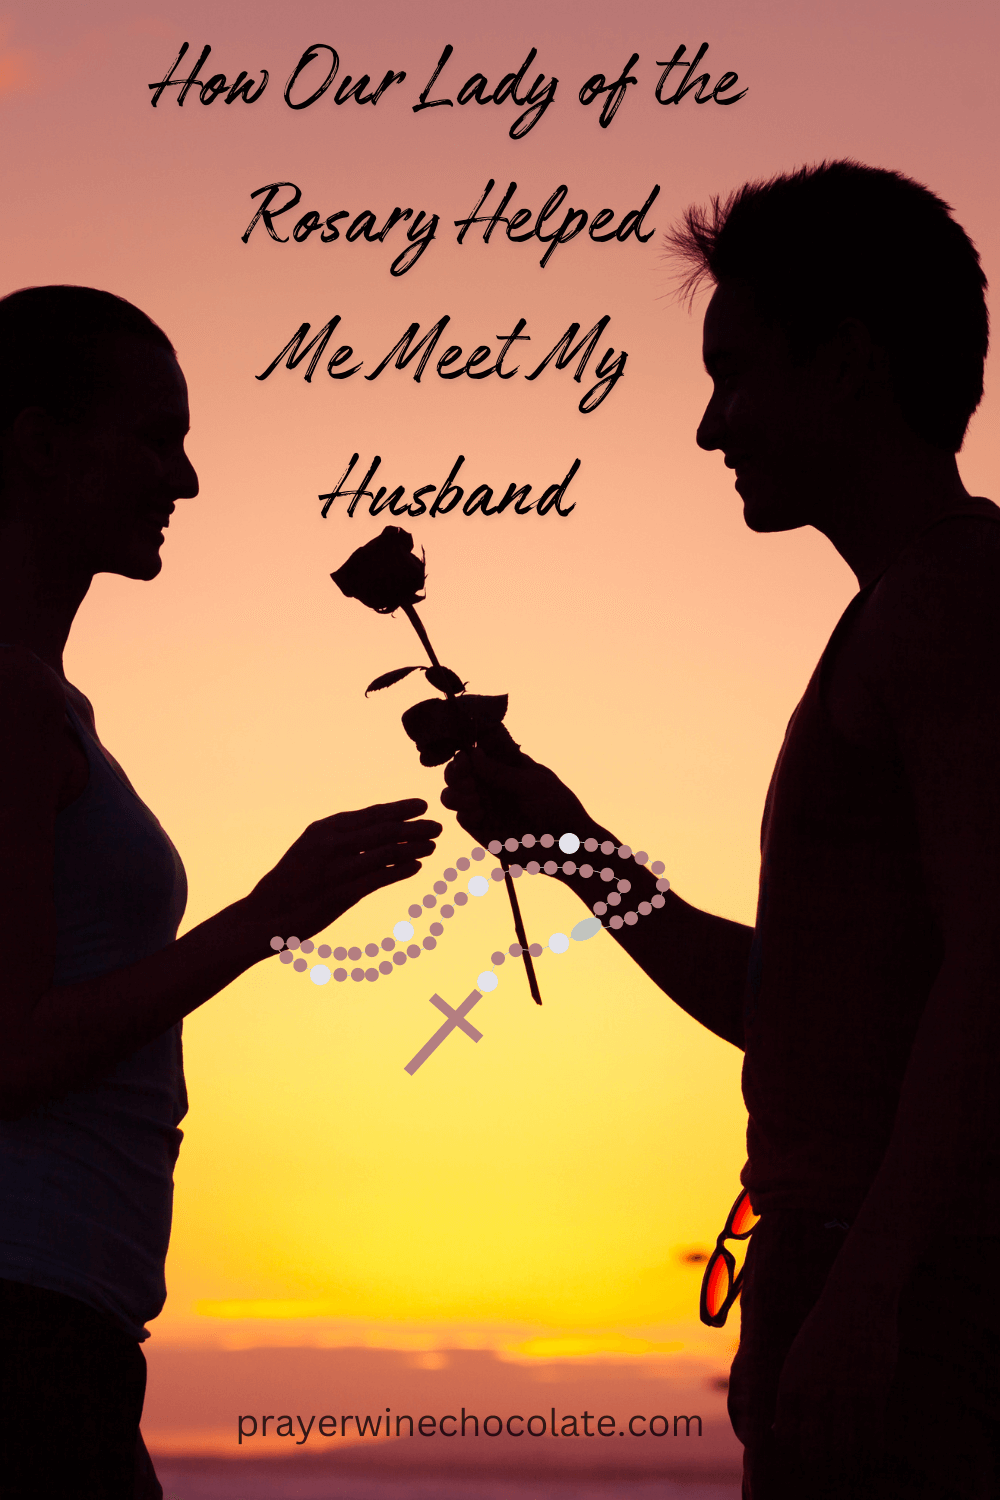 How Our Lady of the Rosary Helped Me Meet My Husband